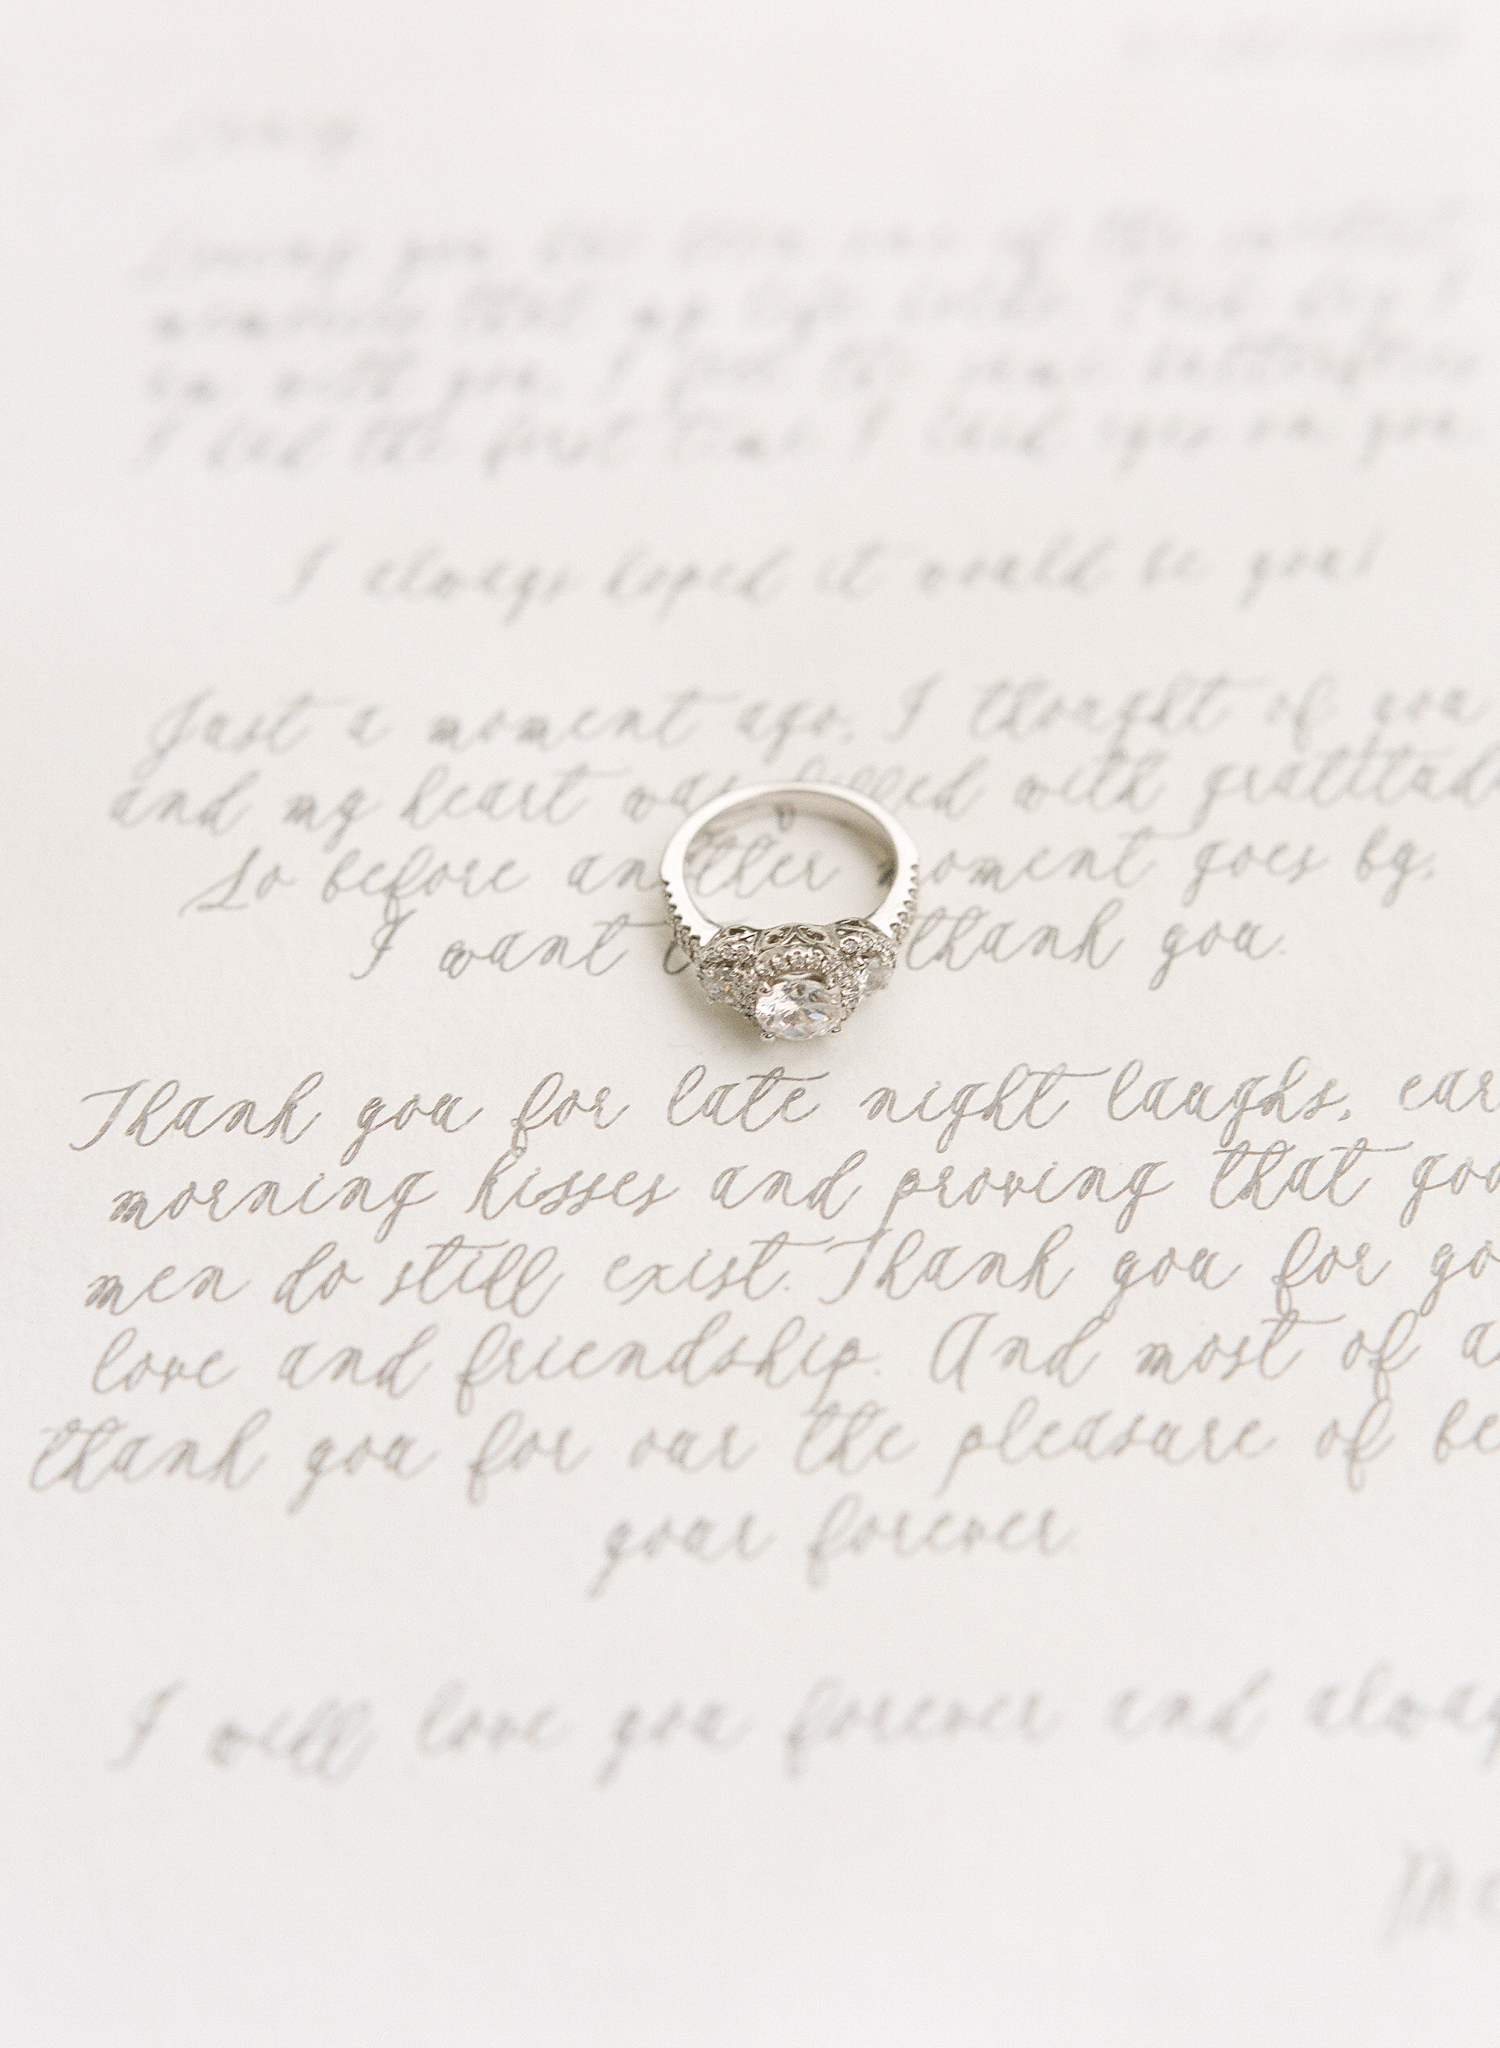 Legare Waring House Wedding Photography | Charleston Wedding Photographer | Charleston Film Photographer | Molly Carr Photography | The Petal Report | Antique Love Letter with Engagement Ring | Calligraphy Love Letter